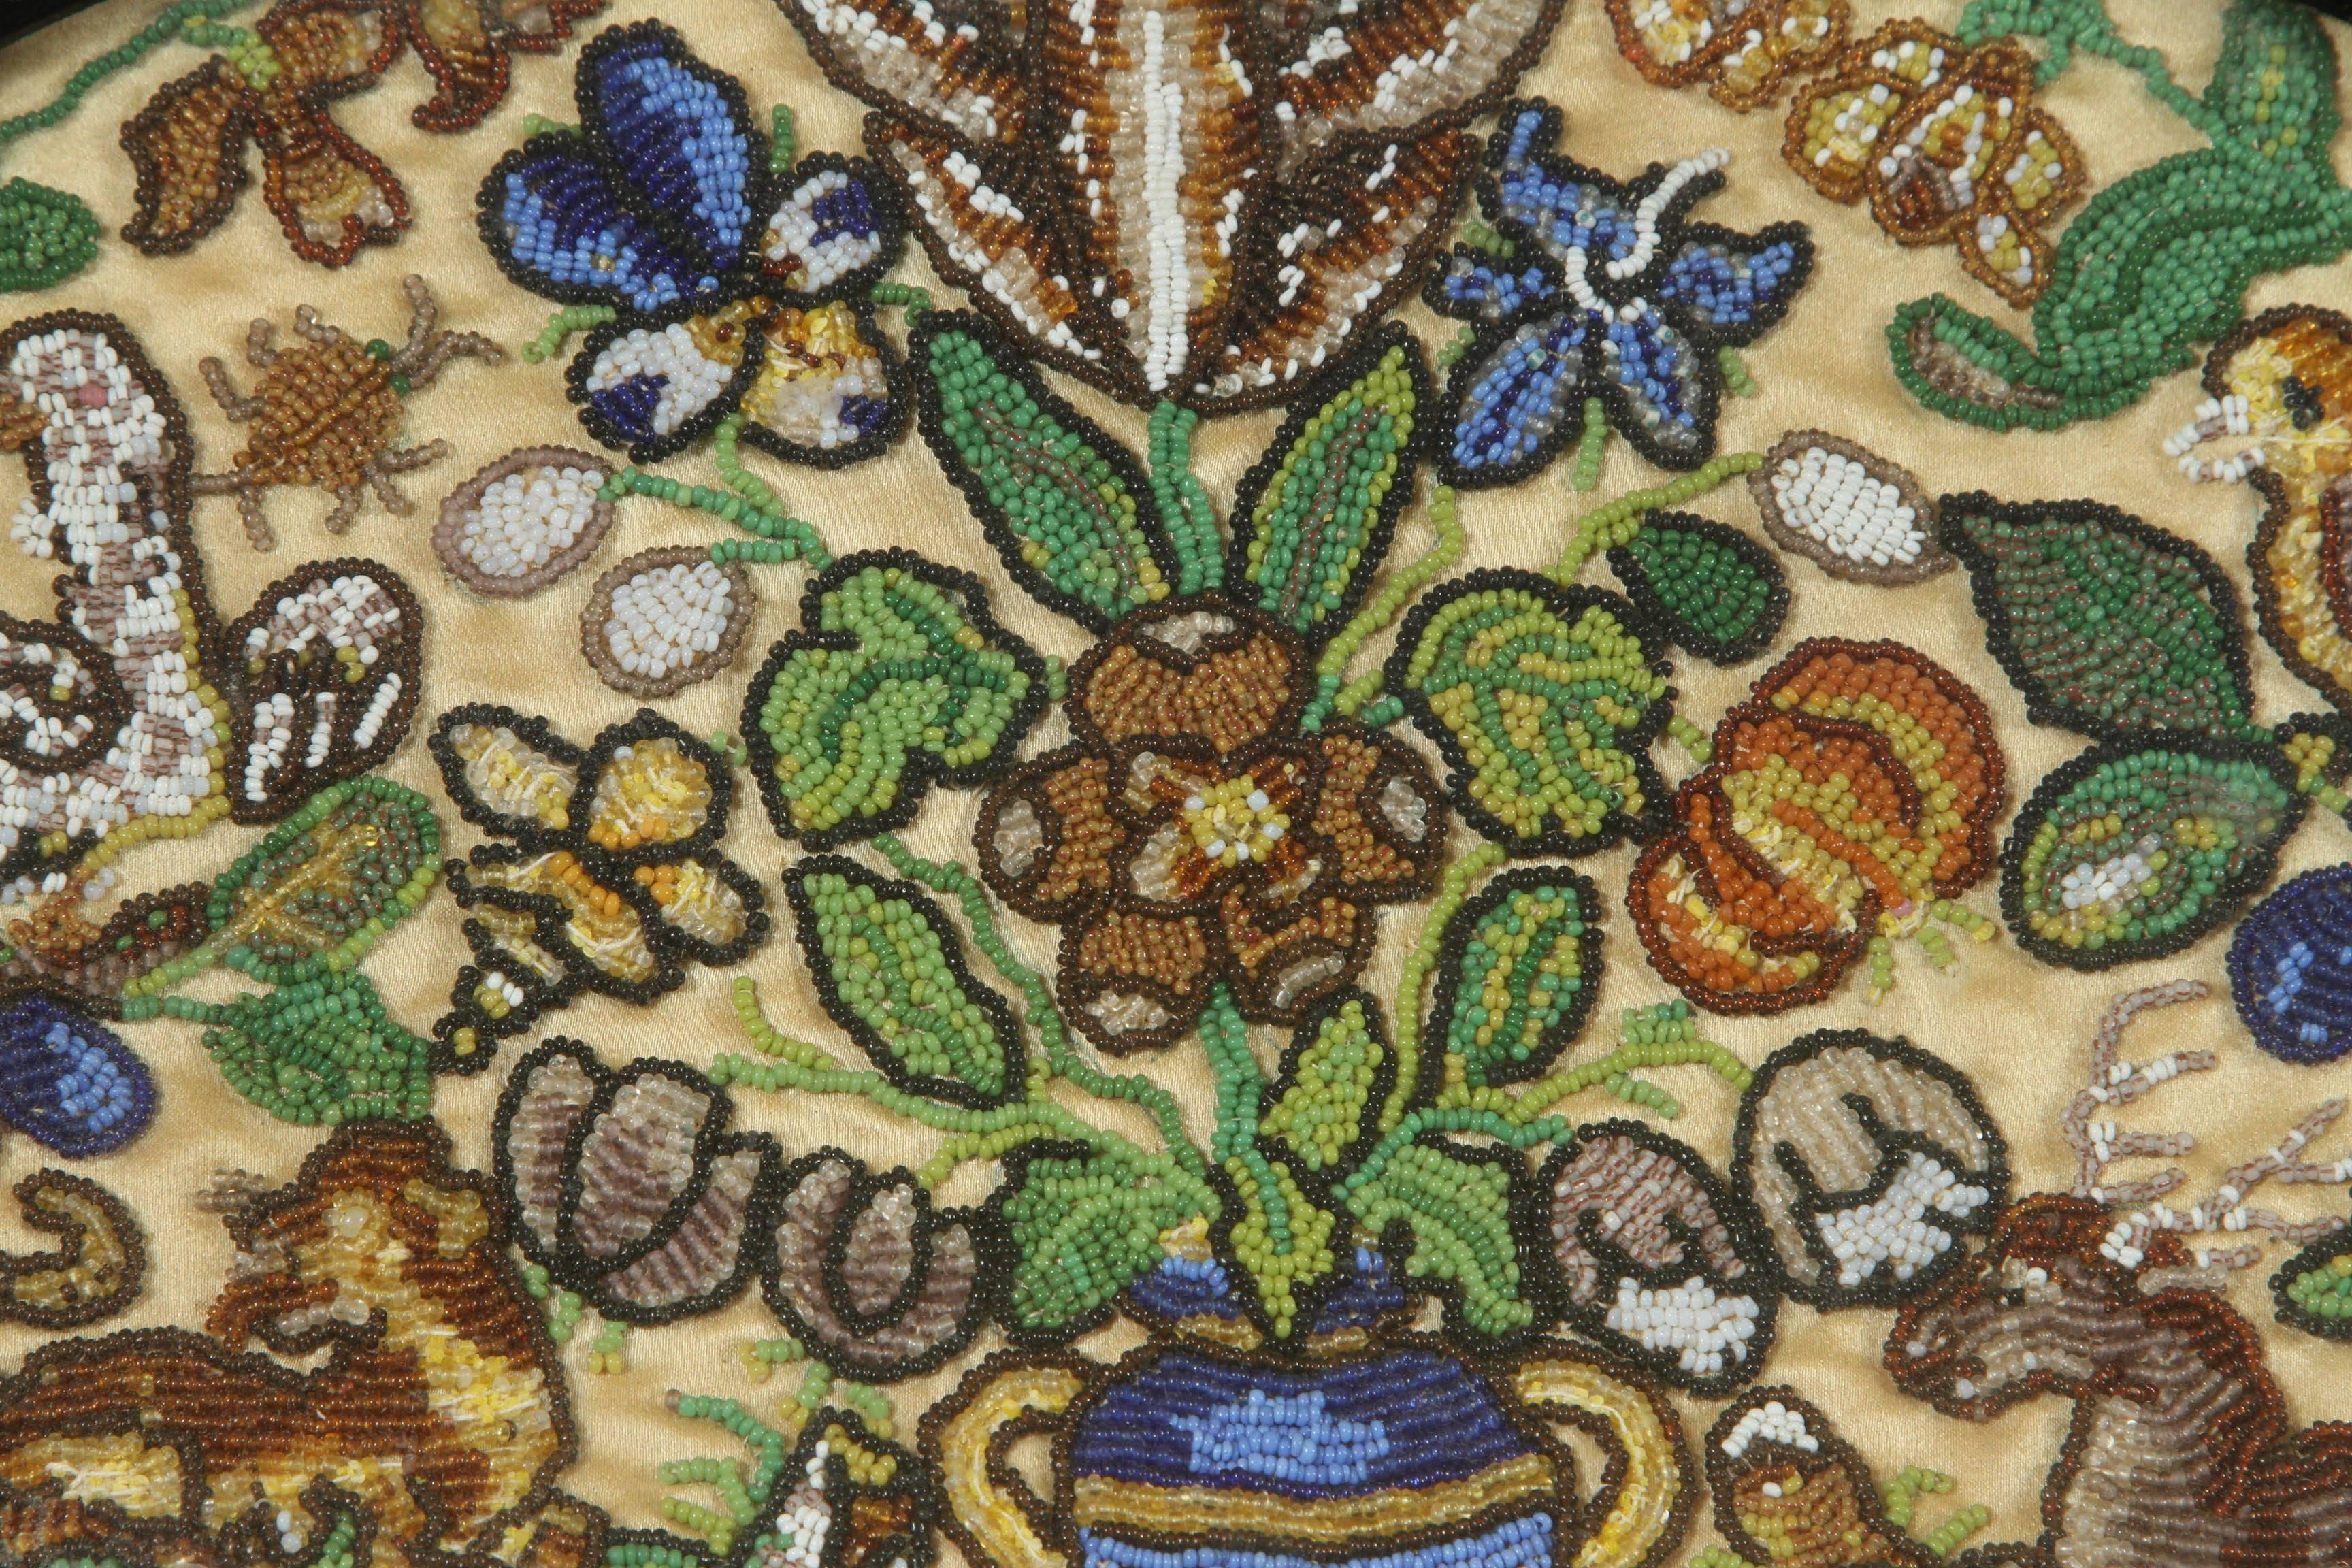 A 17th century English beadwork embroidery with floral and animal motifs, circa 1680. From the collection of Alistair Sampson, London.